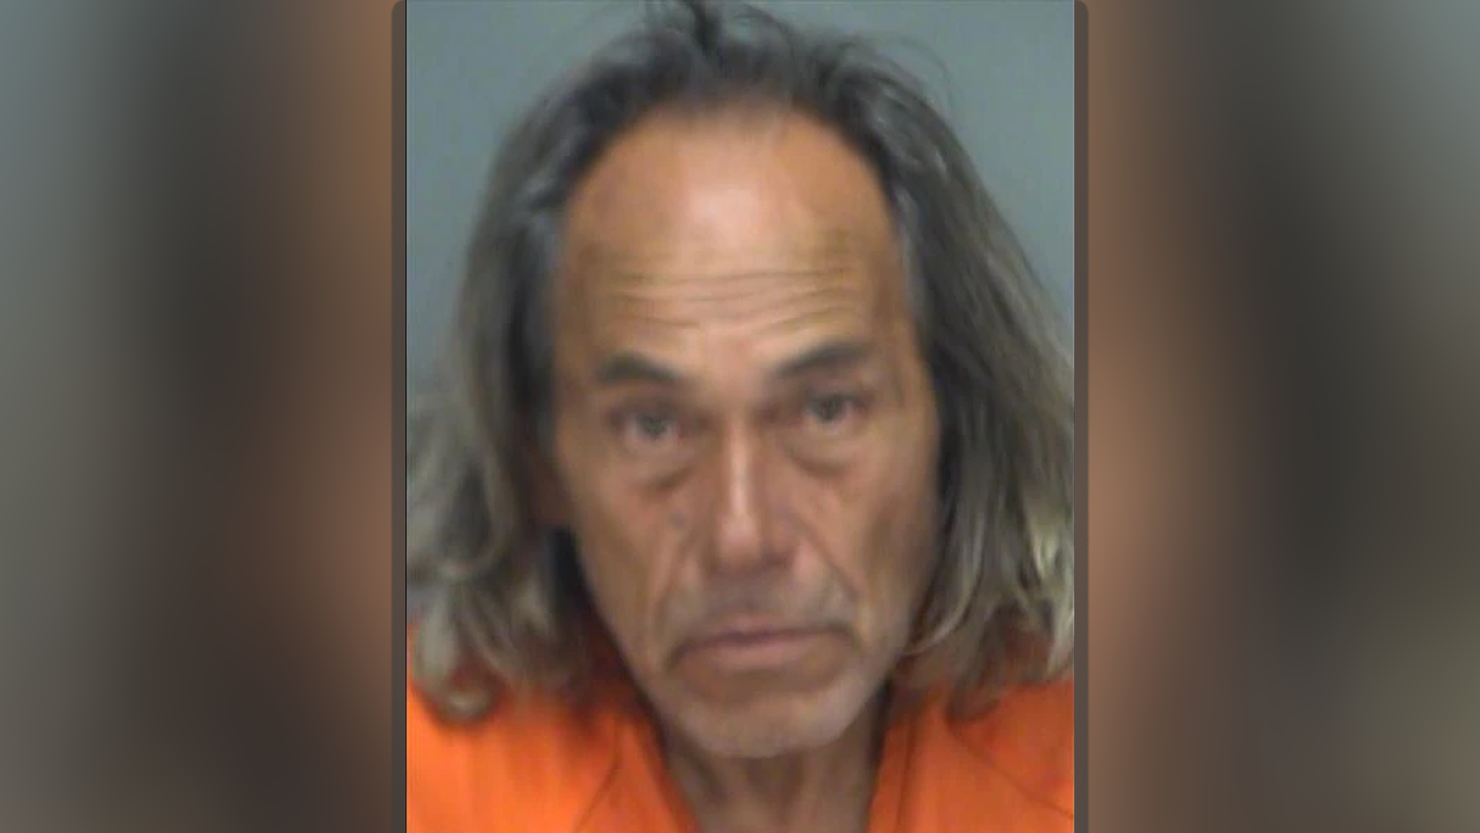 Florida man arrested for handing out marijuana because it was christmas